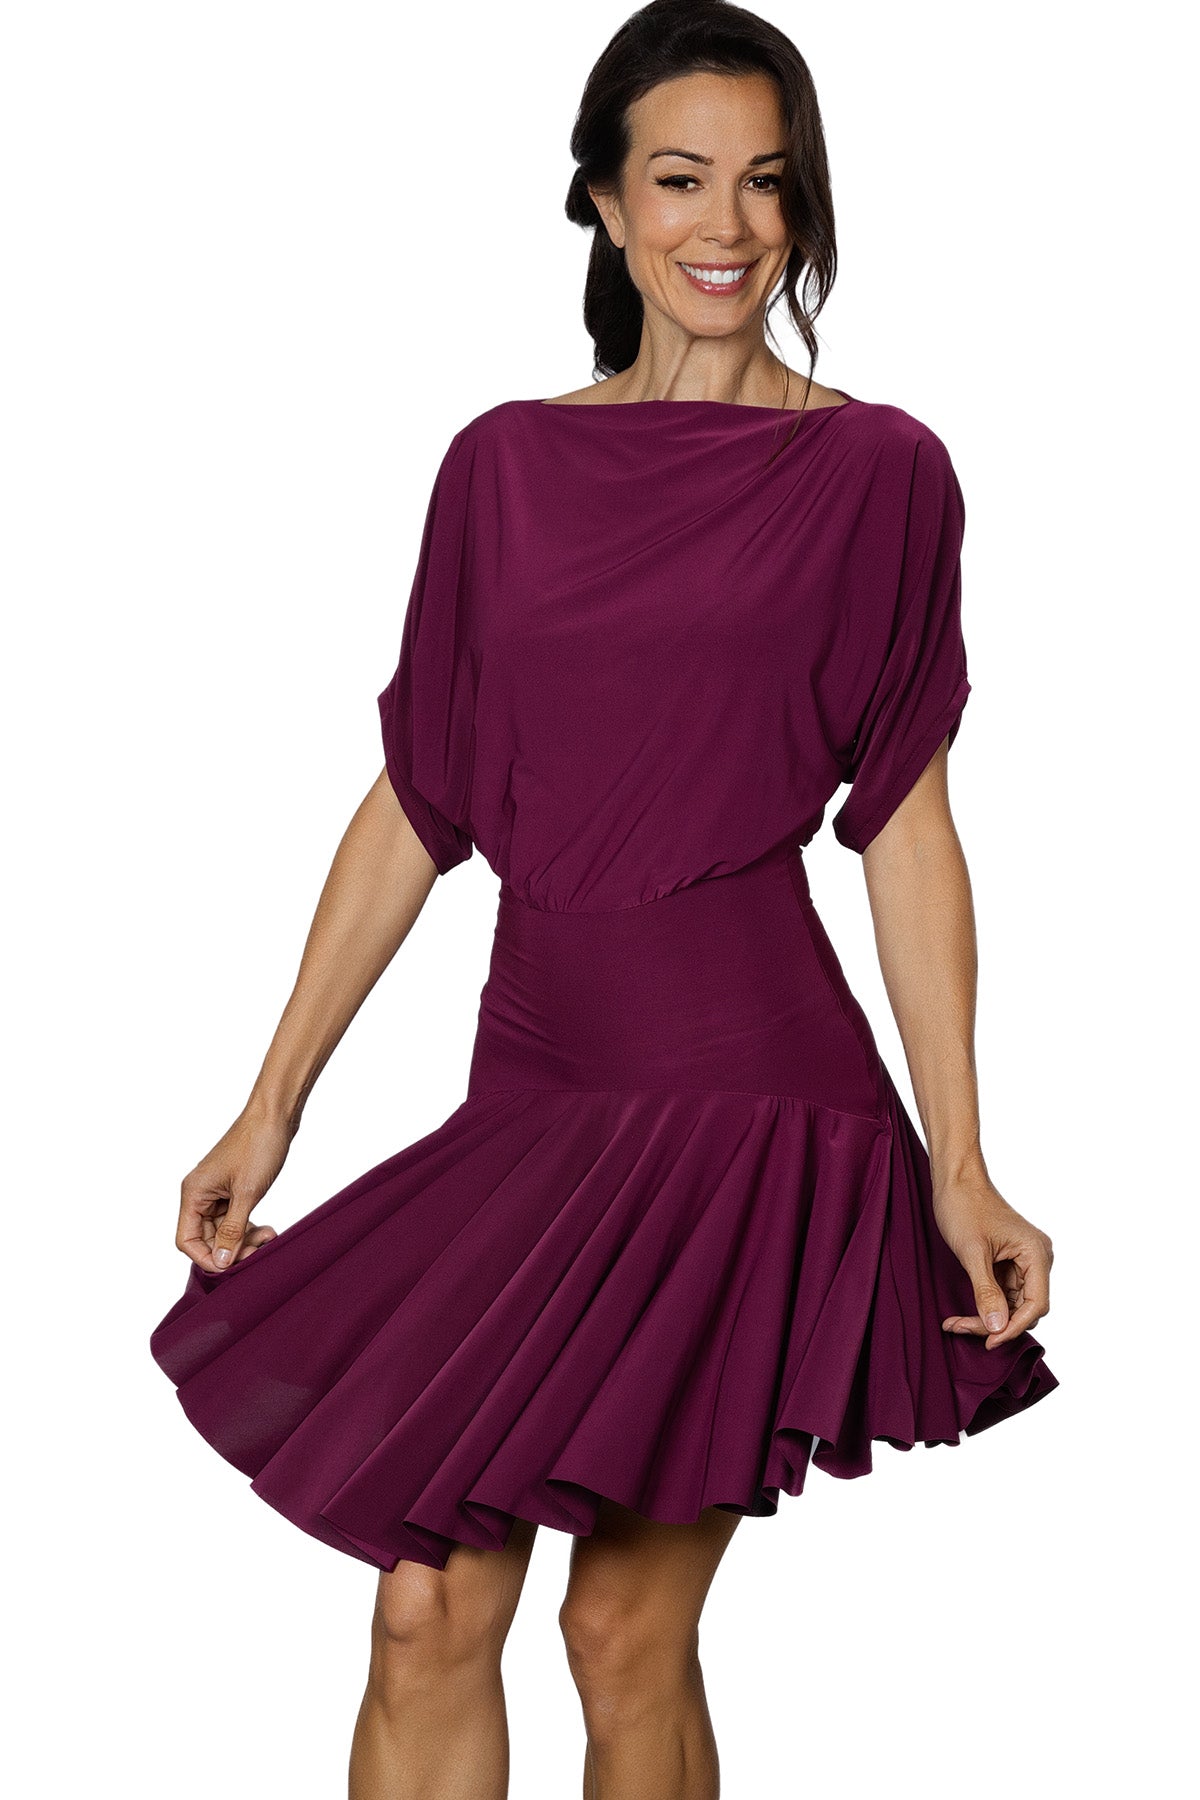 Wine colored Latin dancing dress for ladies